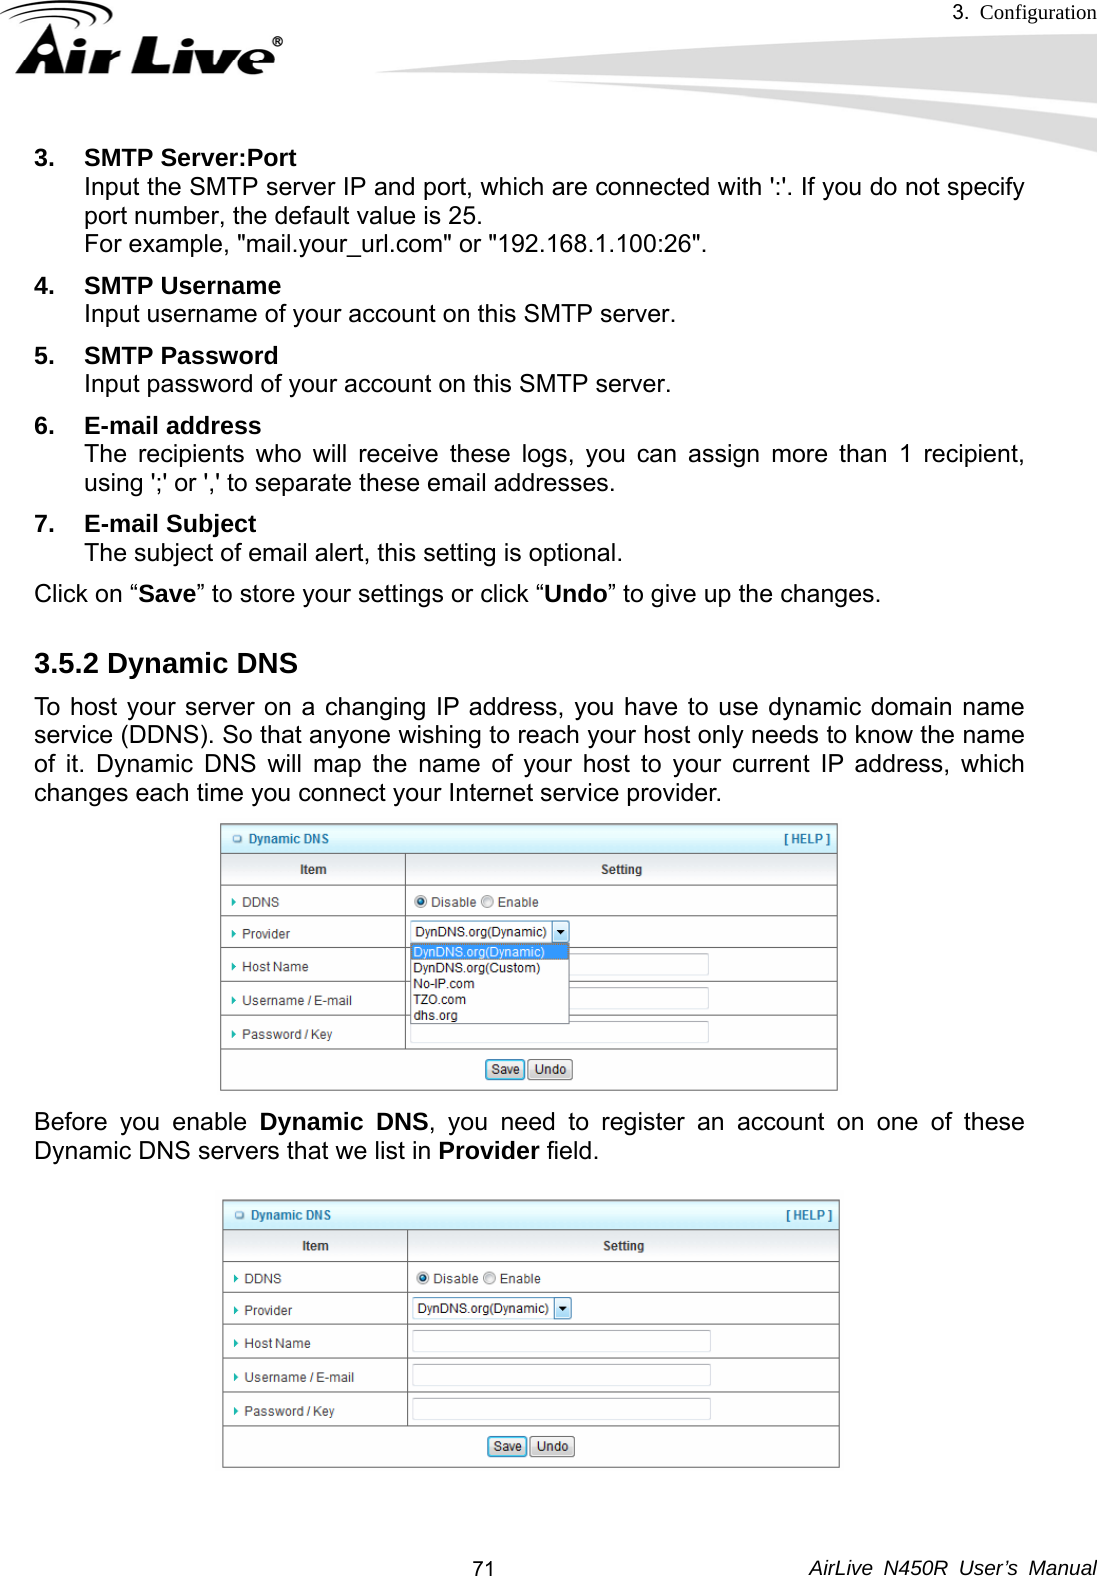 3.  Configuration     AirLive N450R User’s Manual  713. SMTP Server:Port Input the SMTP server IP and port, which are connected with &apos;:&apos;. If you do not specify port number, the default value is 25. For example, &quot;mail.your_url.com&quot; or &quot;192.168.1.100:26&quot;. 4. SMTP Username Input username of your account on this SMTP server. 5. SMTP Password Input password of your account on this SMTP server. 6. E-mail address The recipients who will receive these logs, you can assign more than 1 recipient, using &apos;;&apos; or &apos;,&apos; to separate these email addresses. 7. E-mail Subject The subject of email alert, this setting is optional. Click on “Save” to store your settings or click “Undo” to give up the changes. 3.5.2 Dynamic DNS To host your server on a changing IP address, you have to use dynamic domain name service (DDNS). So that anyone wishing to reach your host only needs to know the name of it. Dynamic DNS will map the name of your host to your current IP address, which changes each time you connect your Internet service provider.   Before you enable Dynamic DNS, you need to register an account on one of these Dynamic DNS servers that we list in Provider field.    